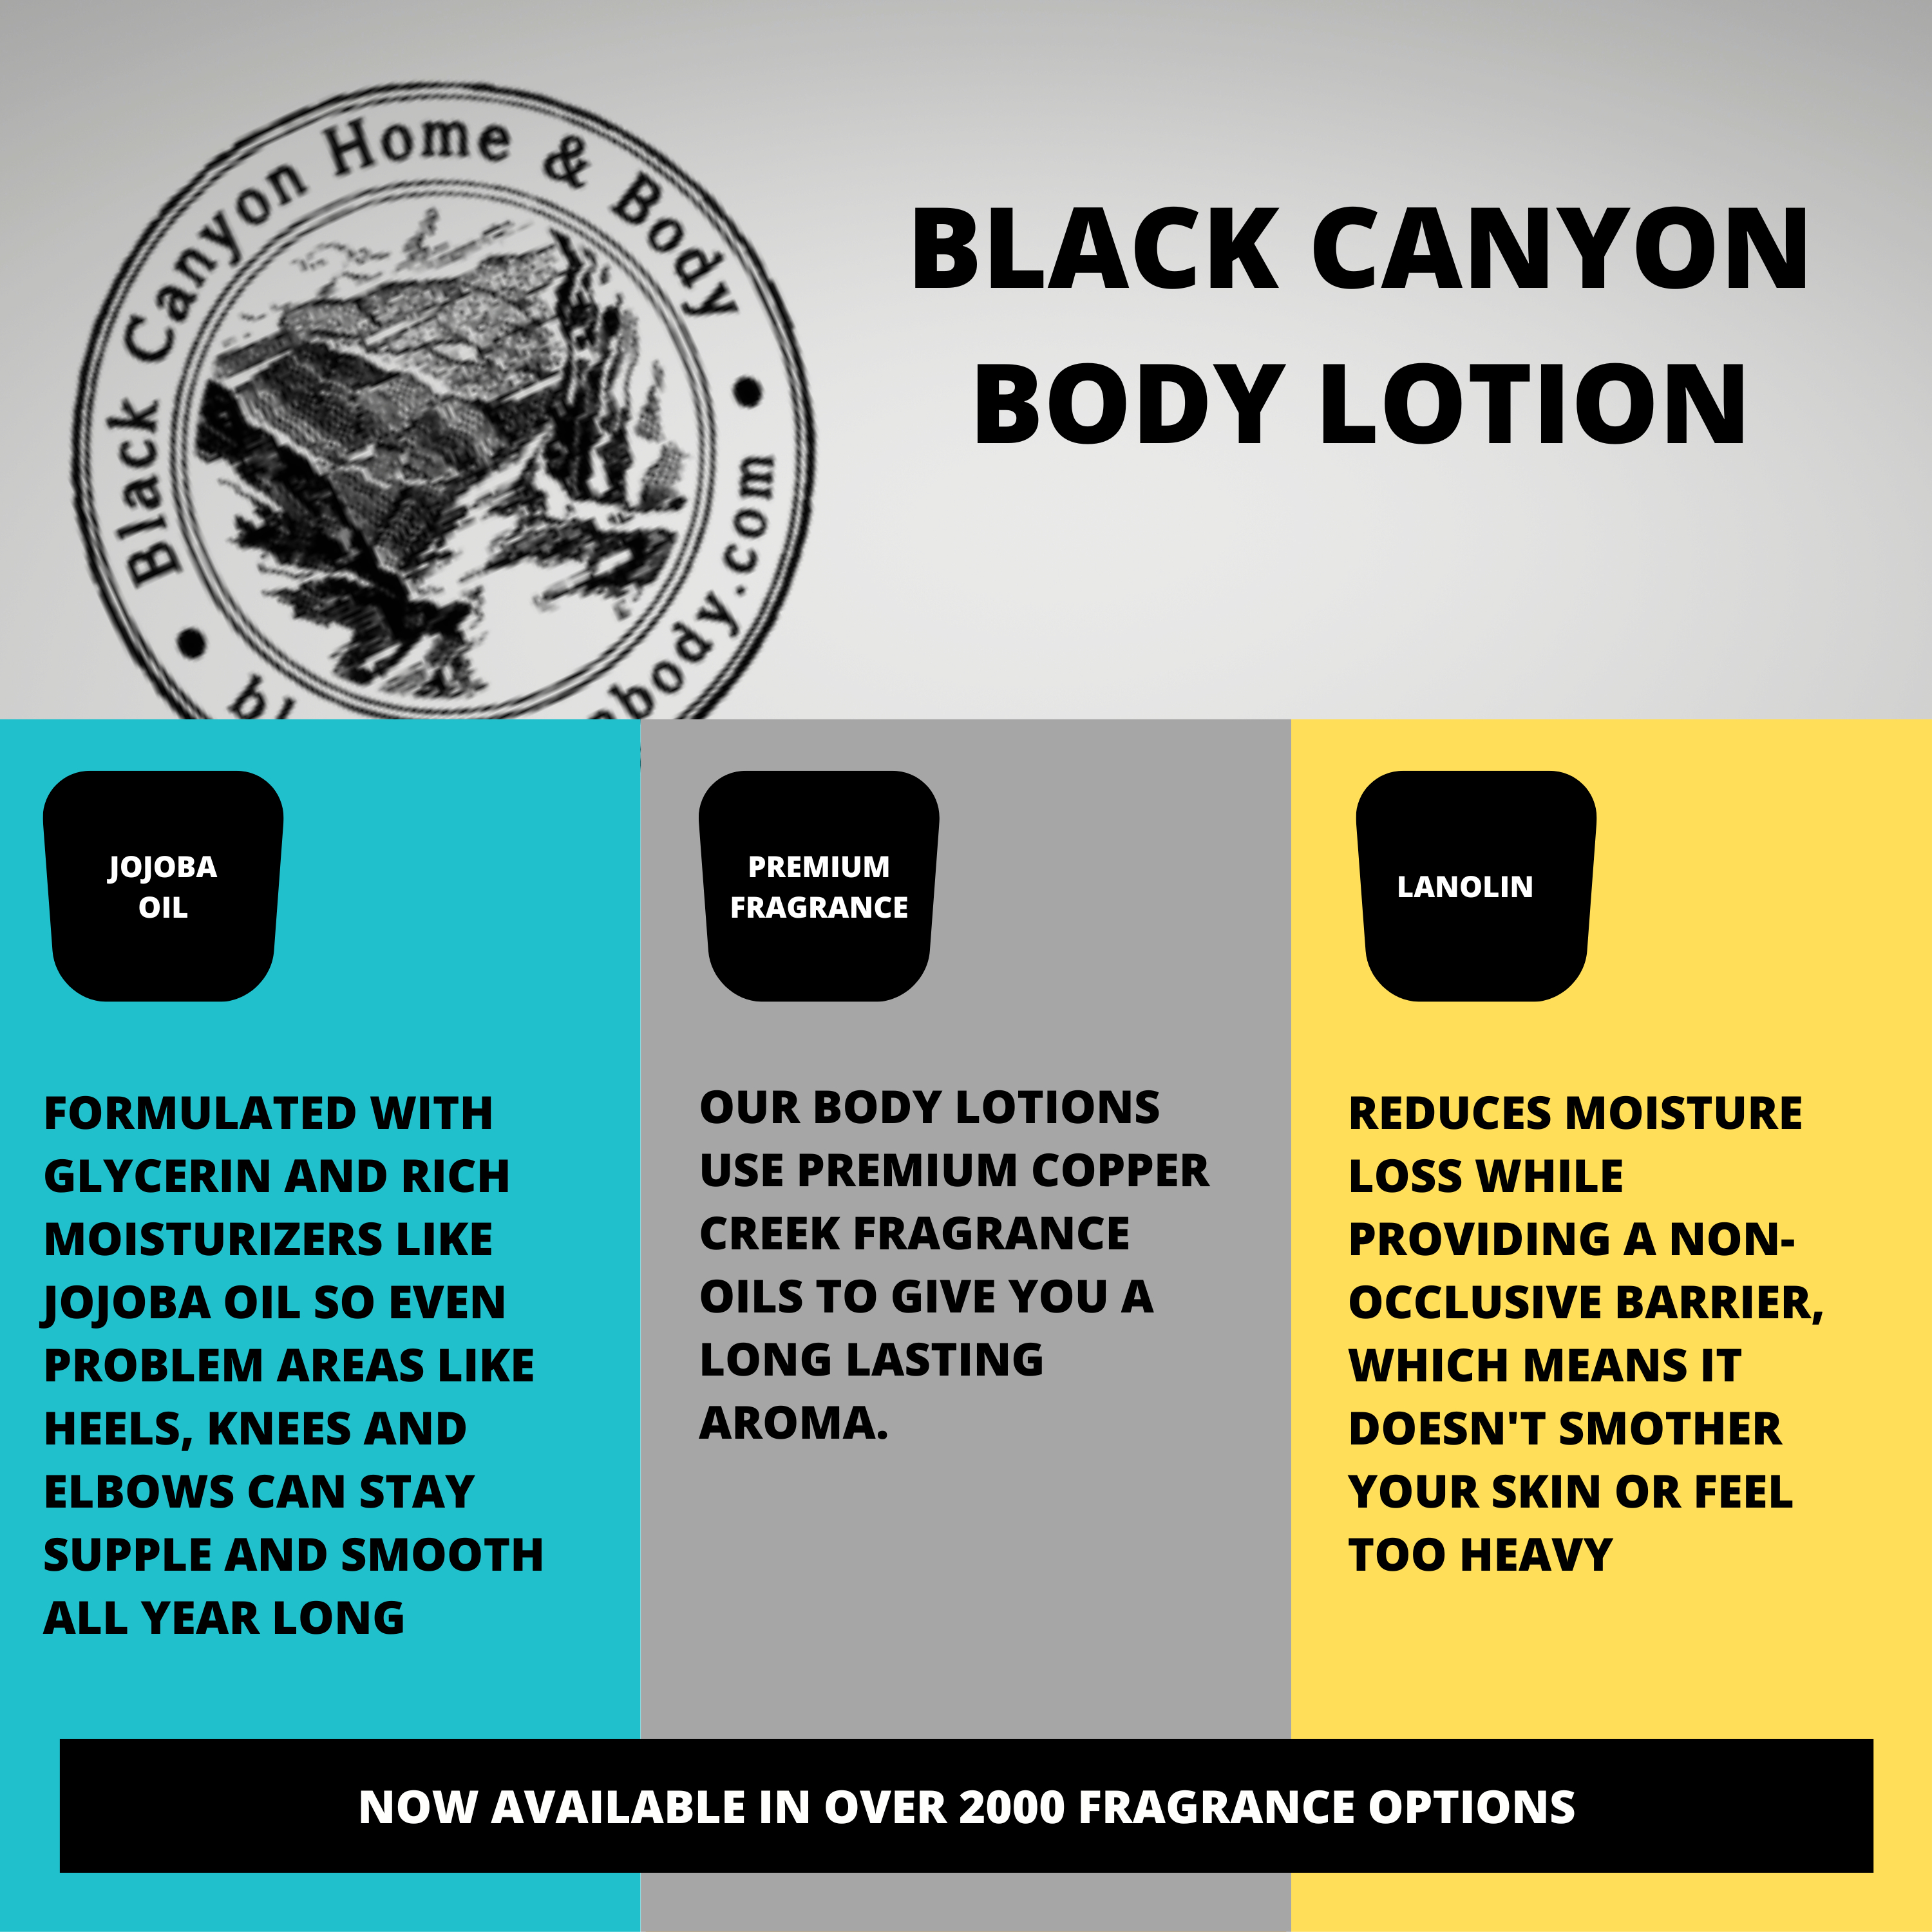 Black Canyon Cherry Blossom Blast Scented Luxury Body Lotion with Lanolin and Jojoba Oil